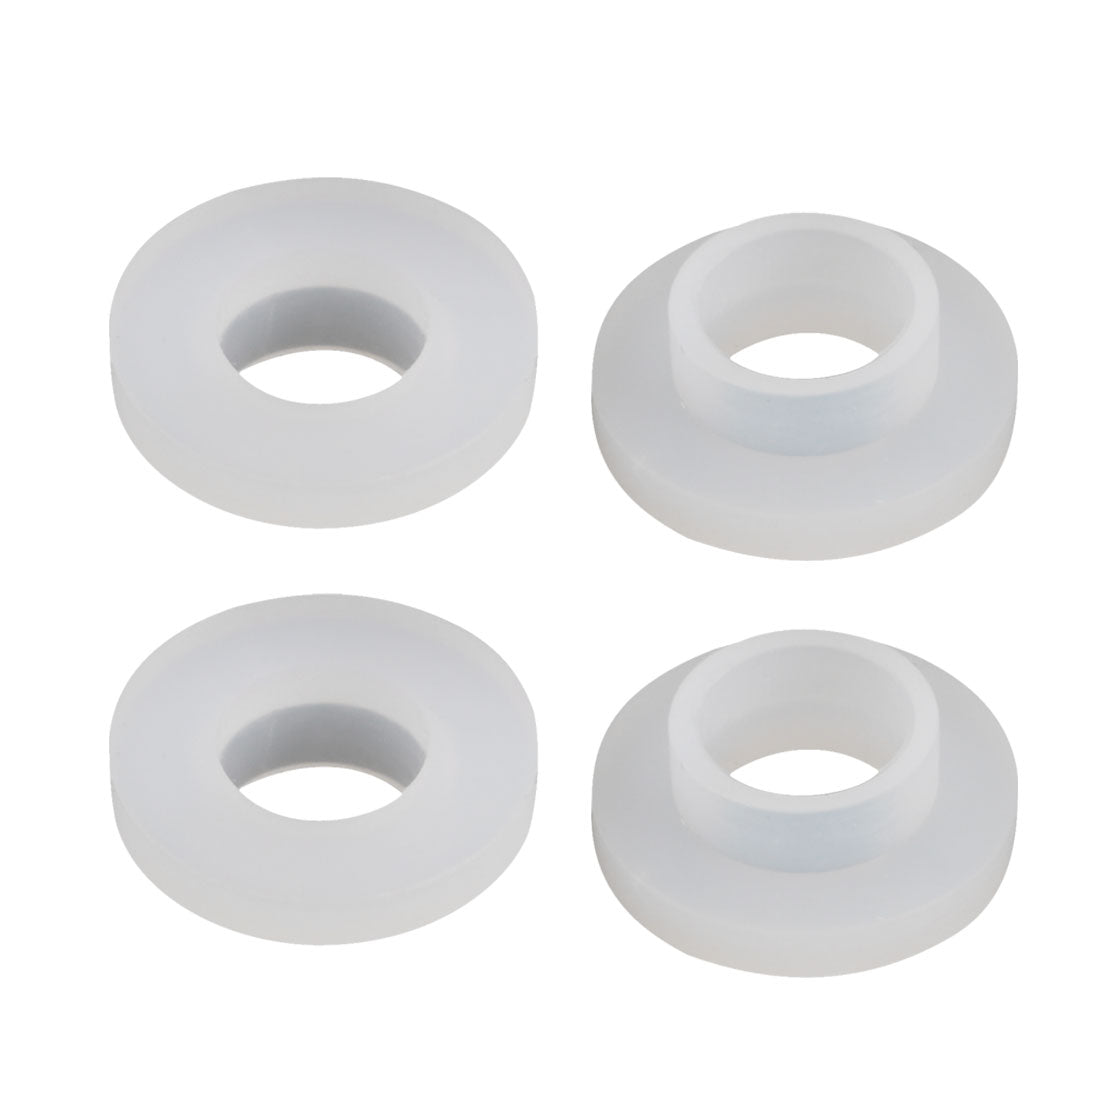 Uxcell Uxcell 15pcs White Silica Gel Round Flat Washers Assortment Size 10x19x3mm